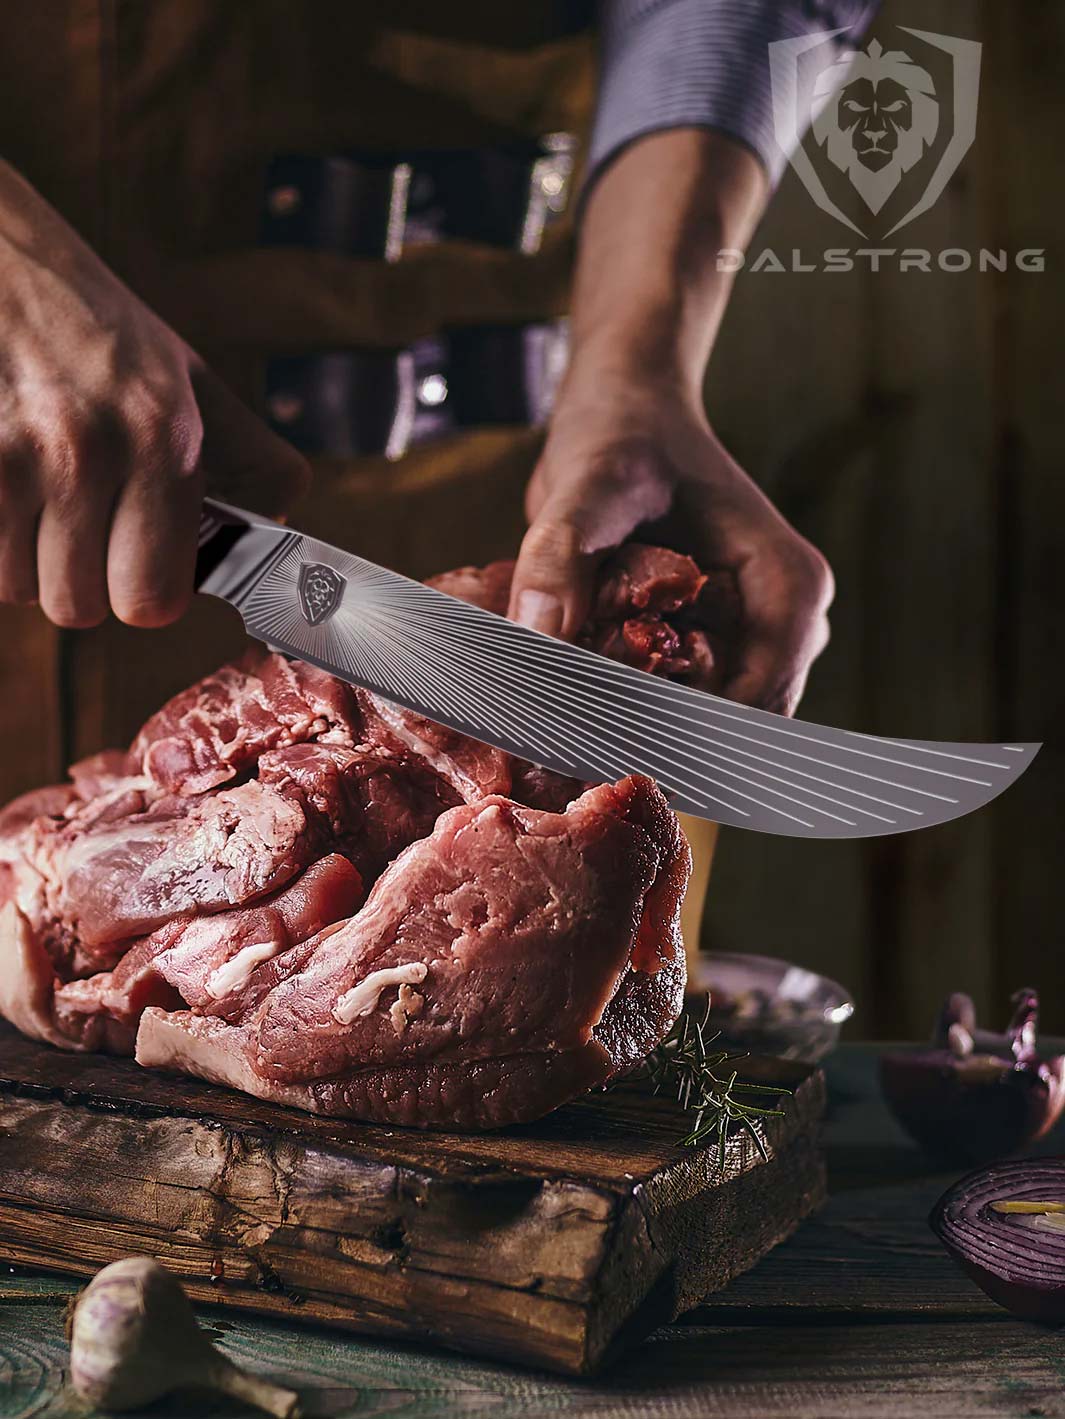 Quantum 1 Series 10 Butcher Knife | Dalstrong Knives